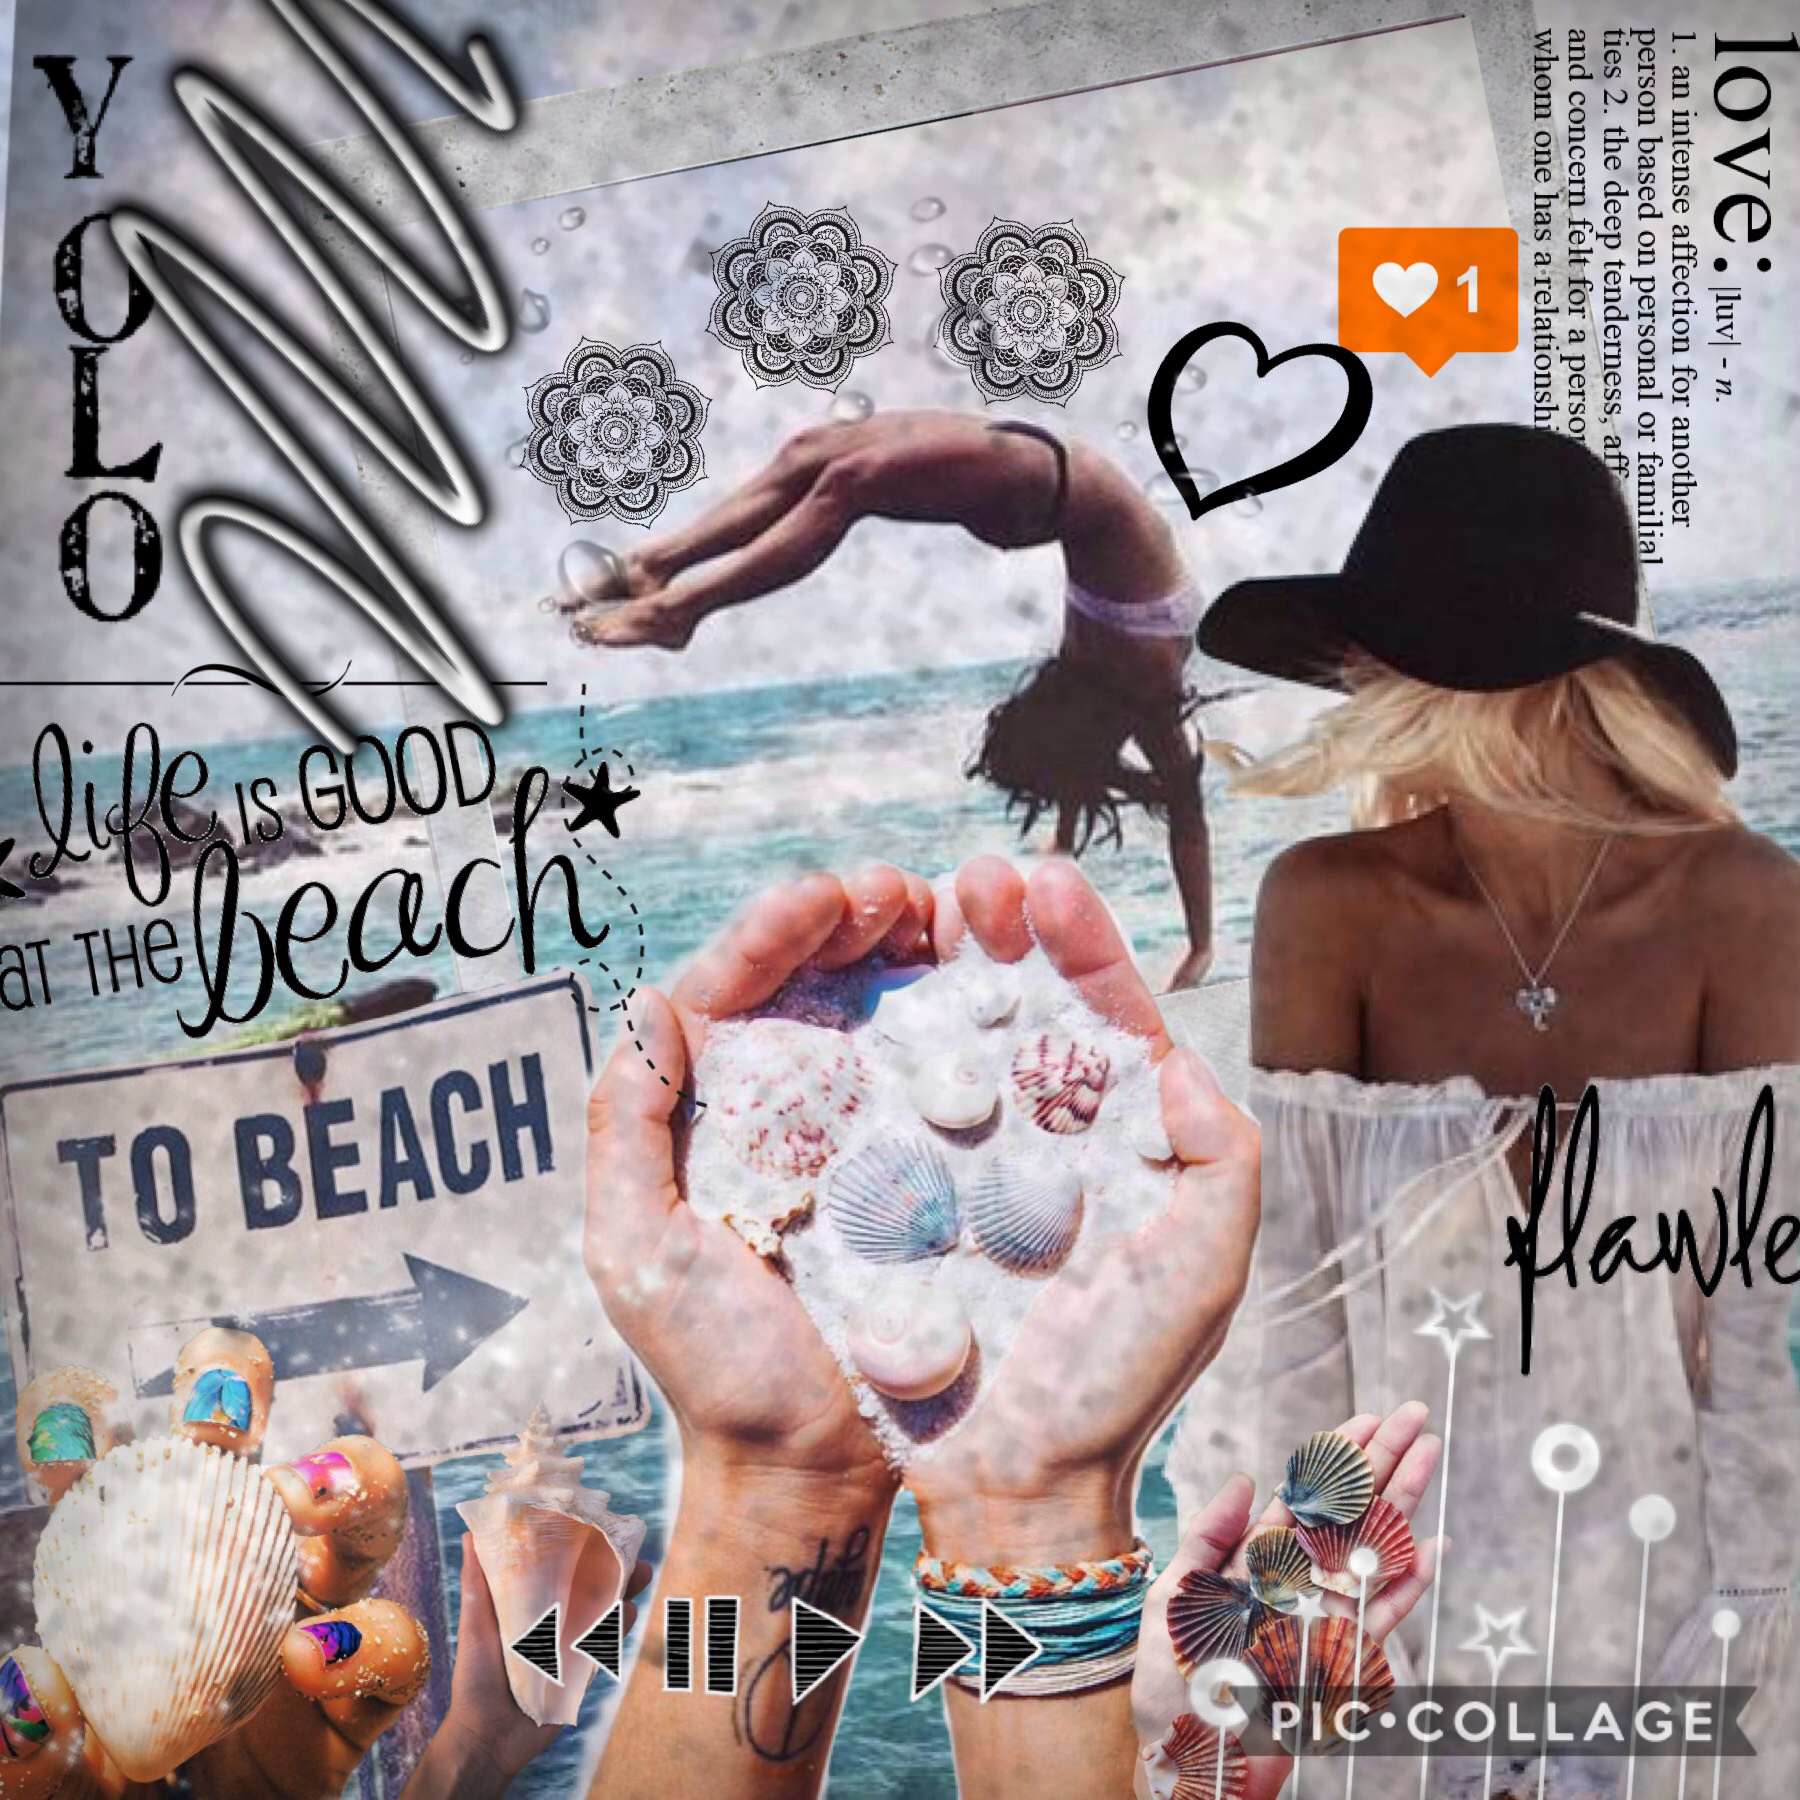 tap!
Hey everybody! What do ya think? Don't forget to follow BeachCraver and join my winter collage contest!! (ends Feb 1 so HURRY AND JOIN PLZ) tysm💜💜